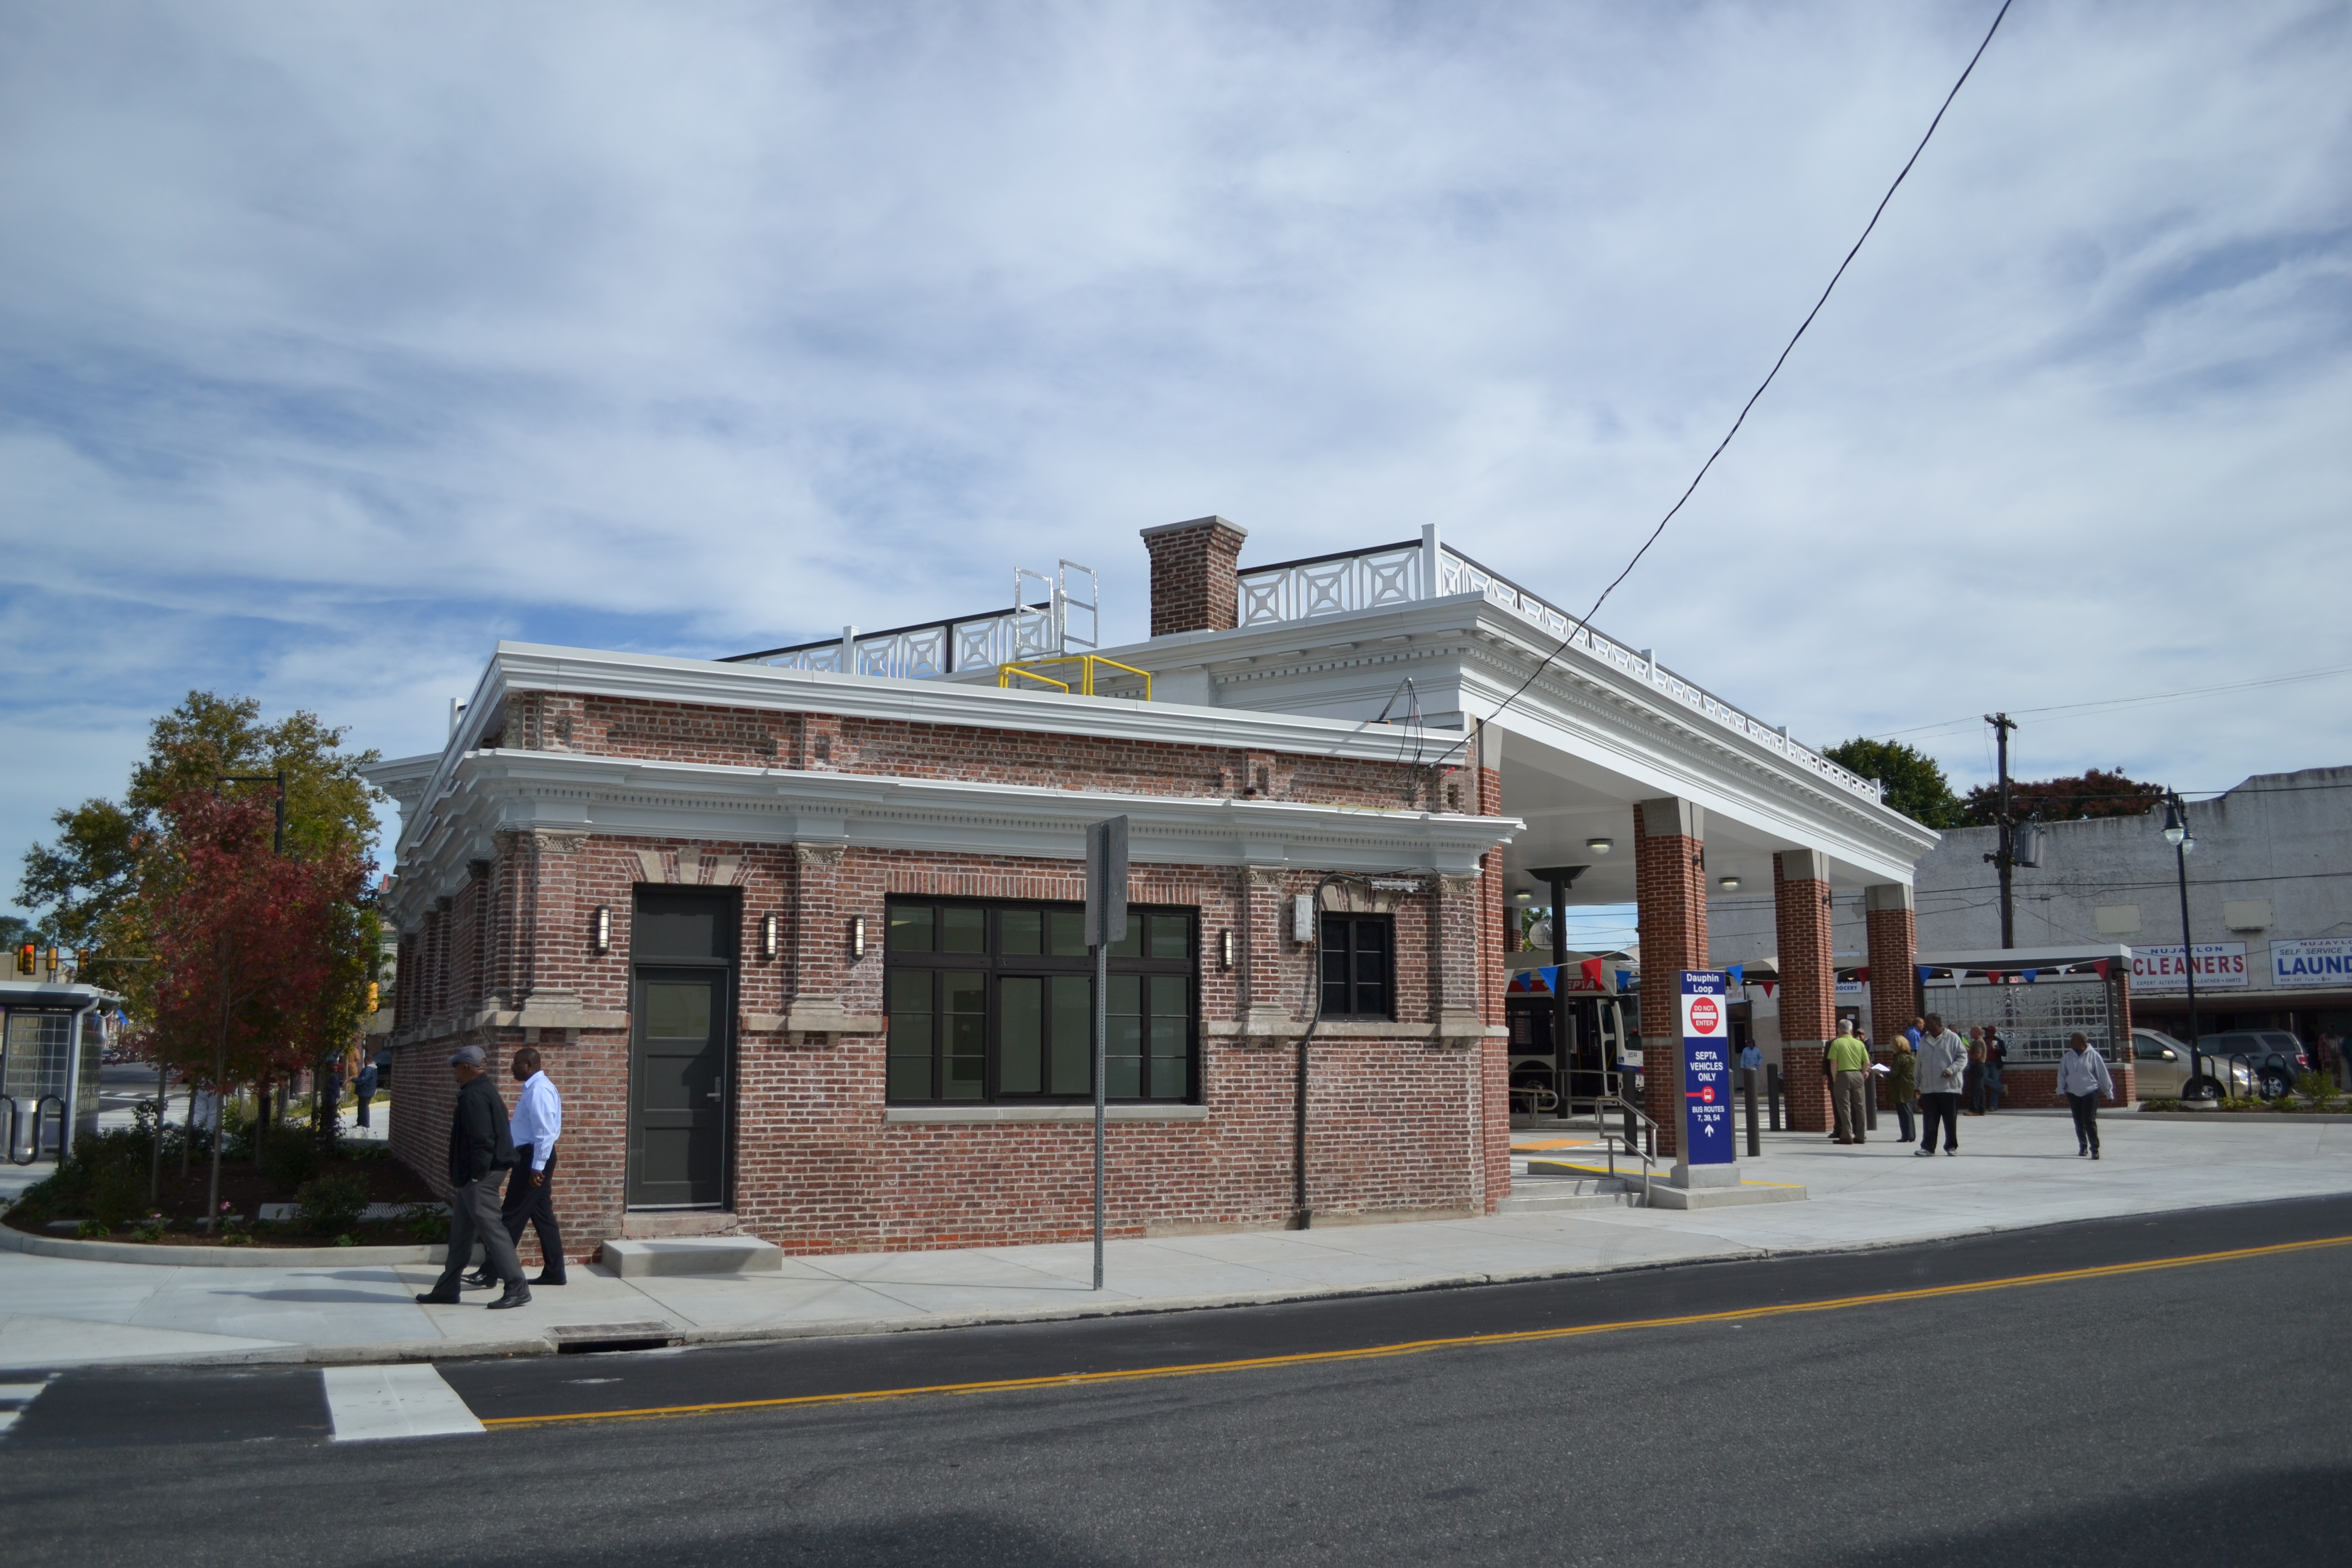 SEPTA preserved and restored the bus loop building, left, and replaced the bus canopy, right, using some of the original bricks